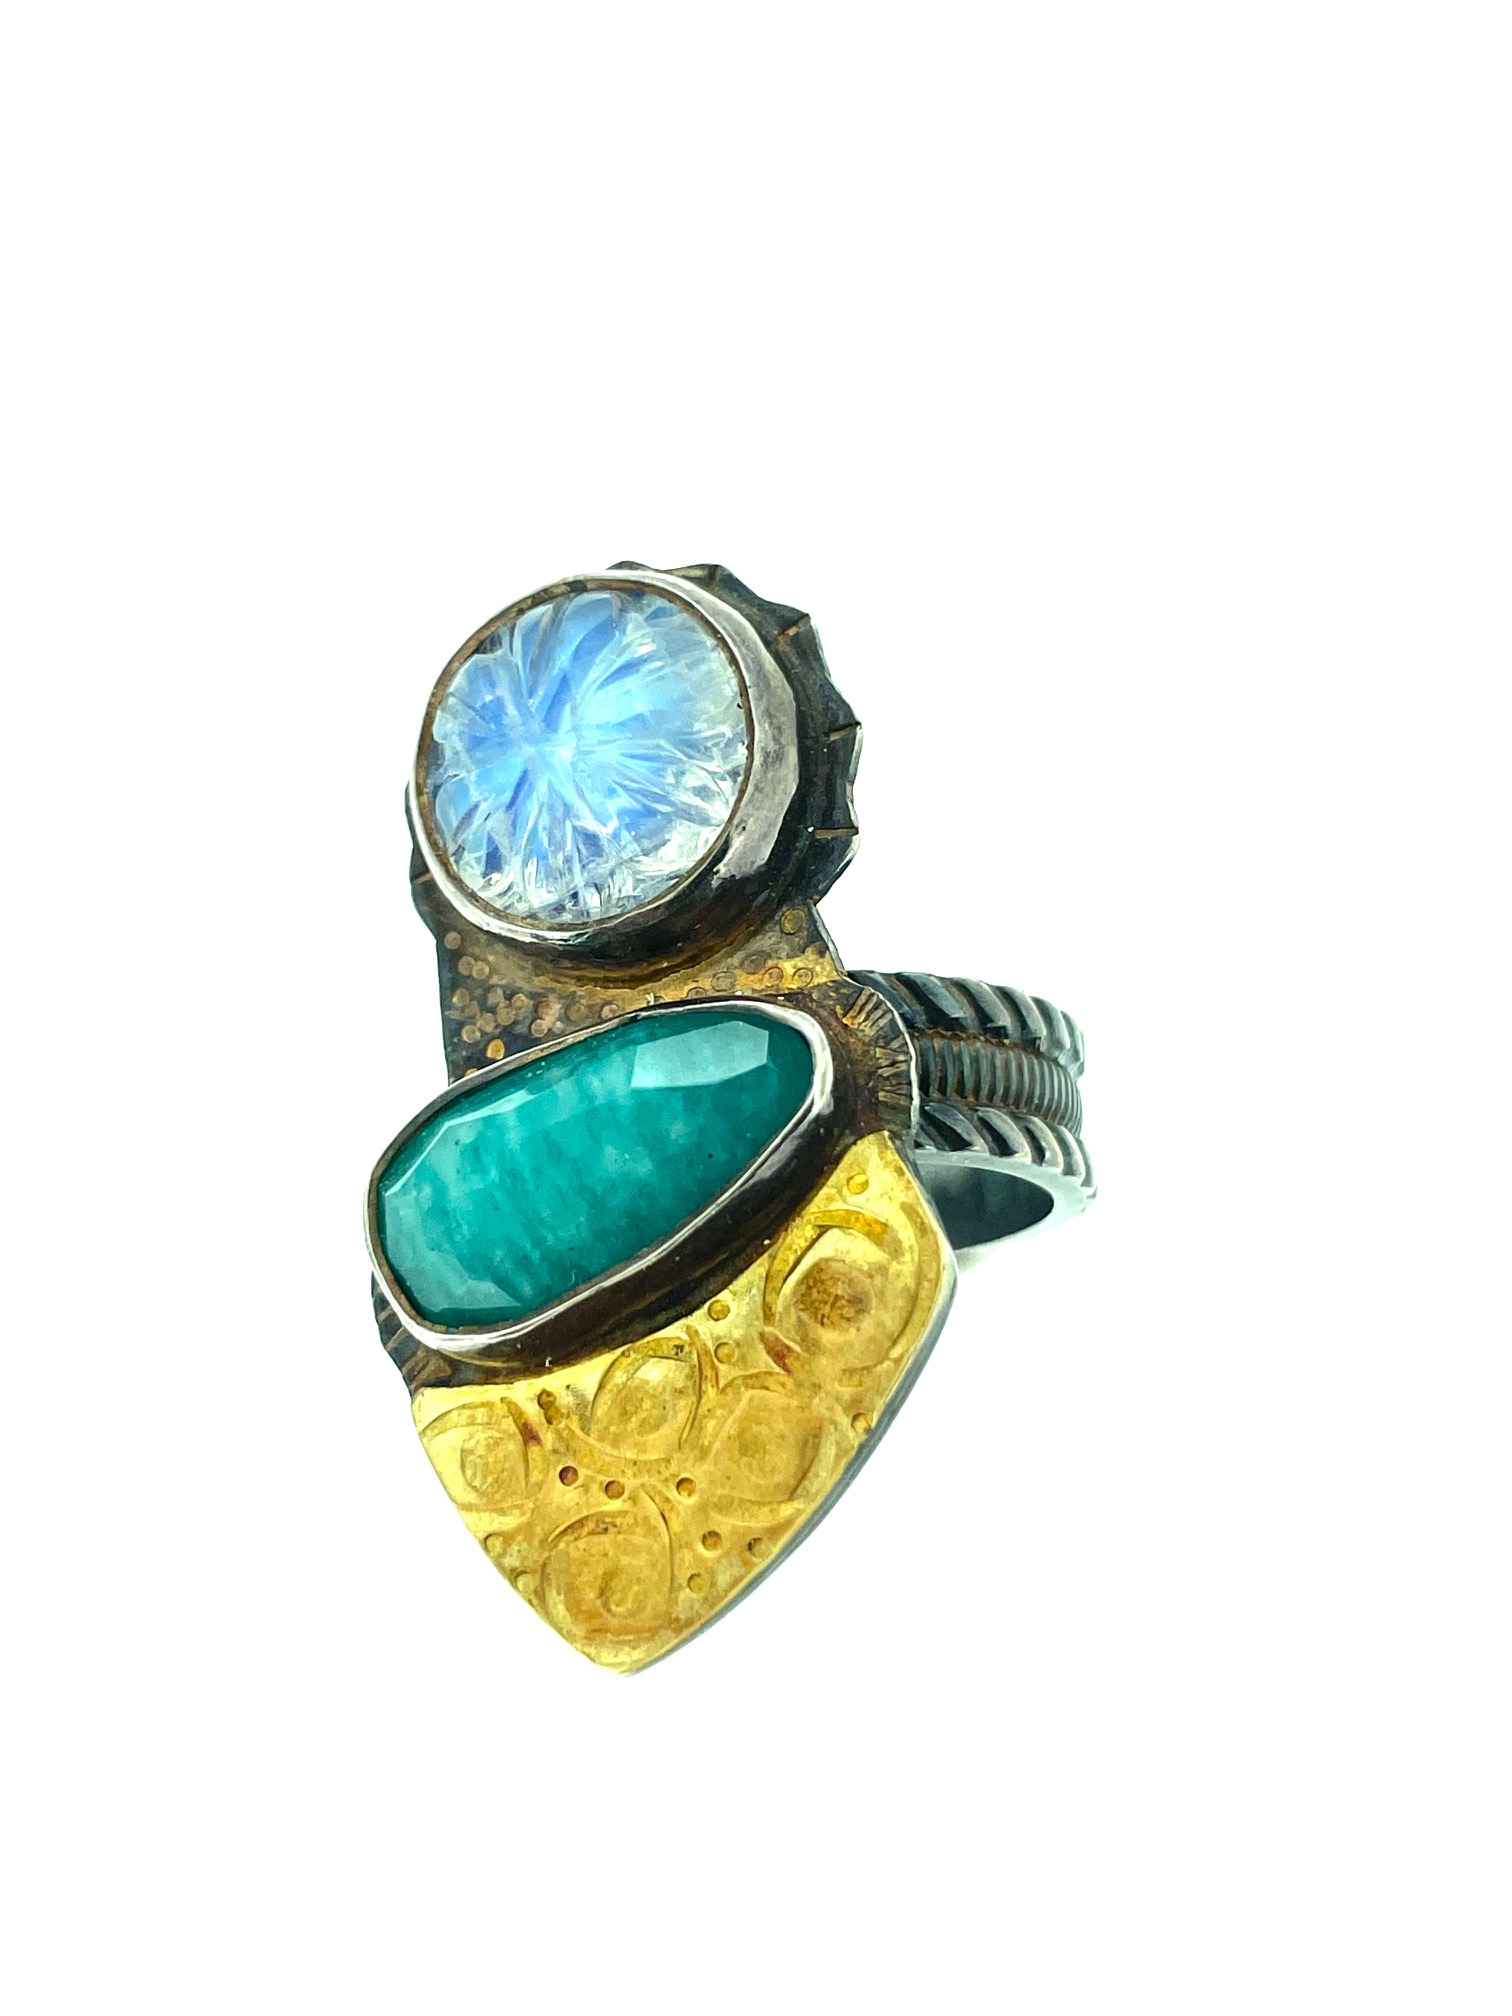 Sterling Silver, 22k Gold, Faceted Amazonite, Rainbow Moonstone Ring - Size 6 3/4